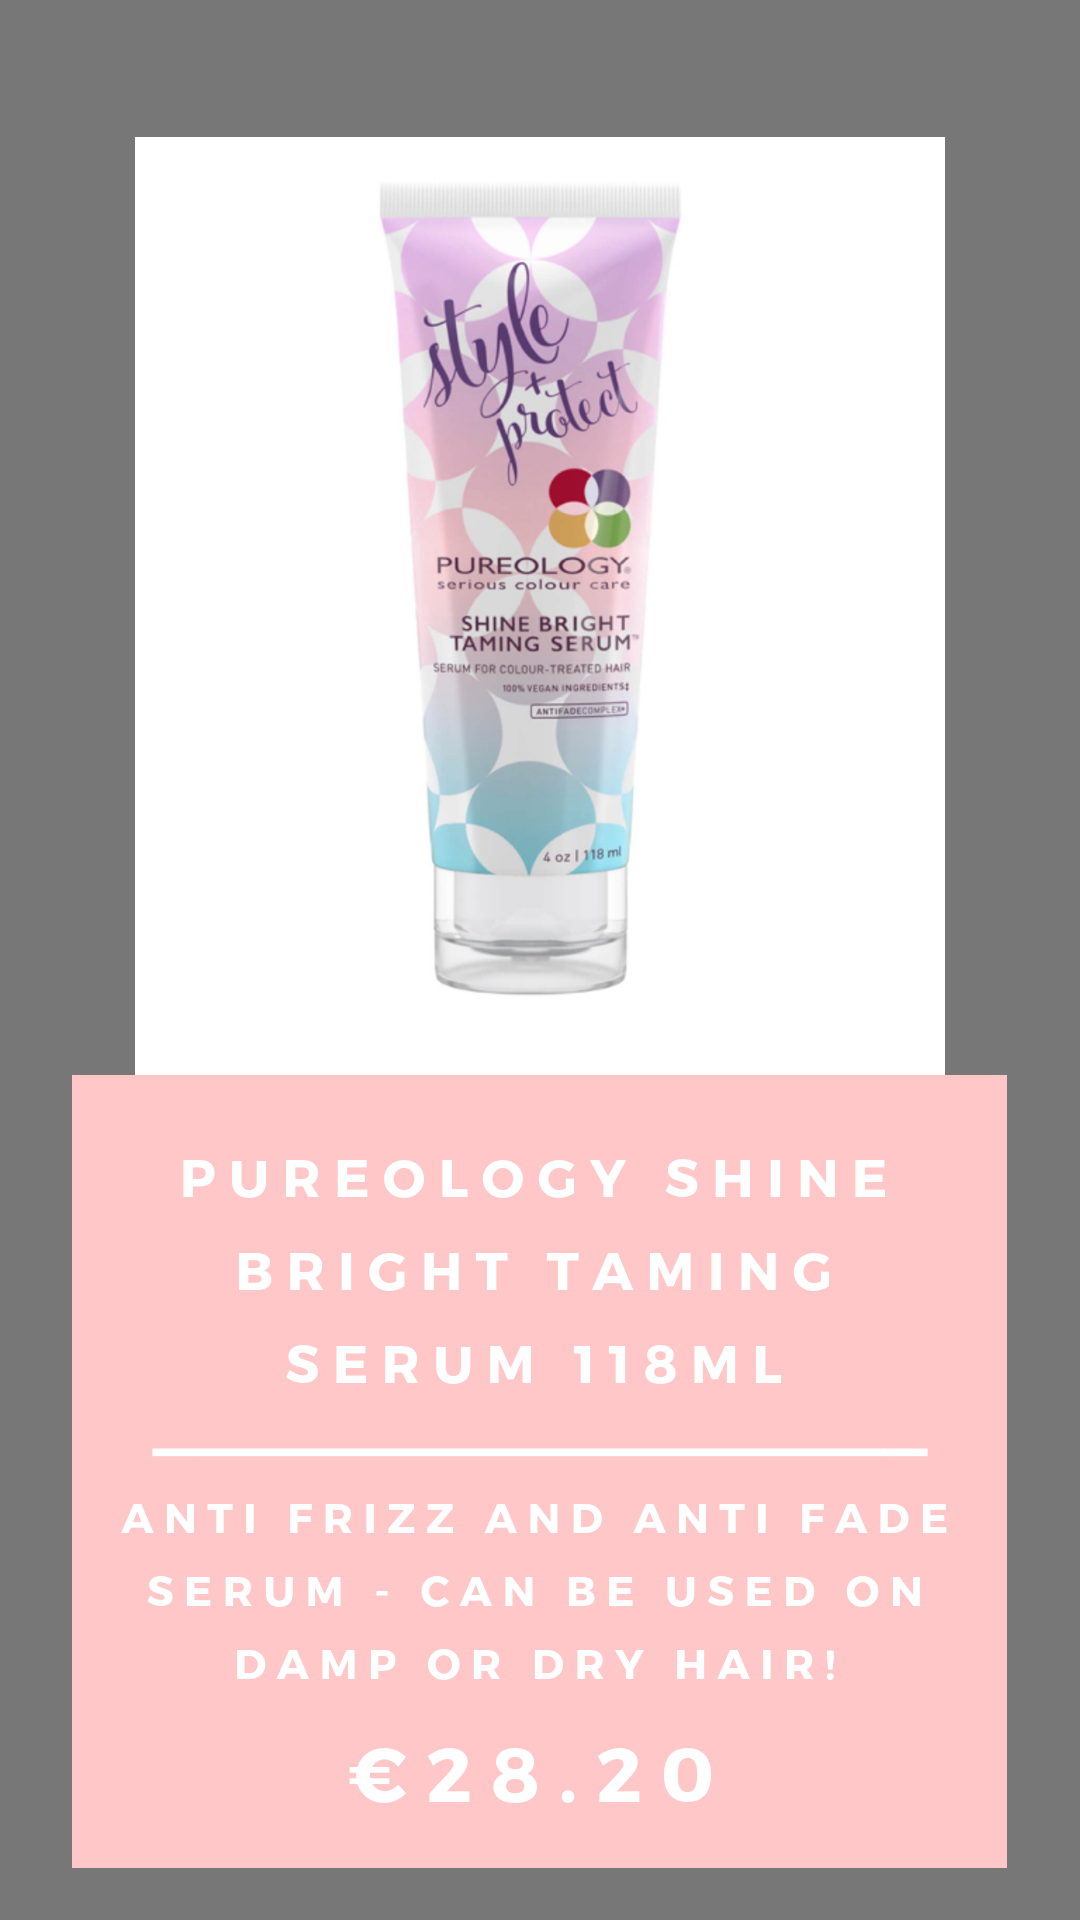    SHOP THE PUREOLOGY SHINE BRIGHT AND TAME SERUM HERE!   